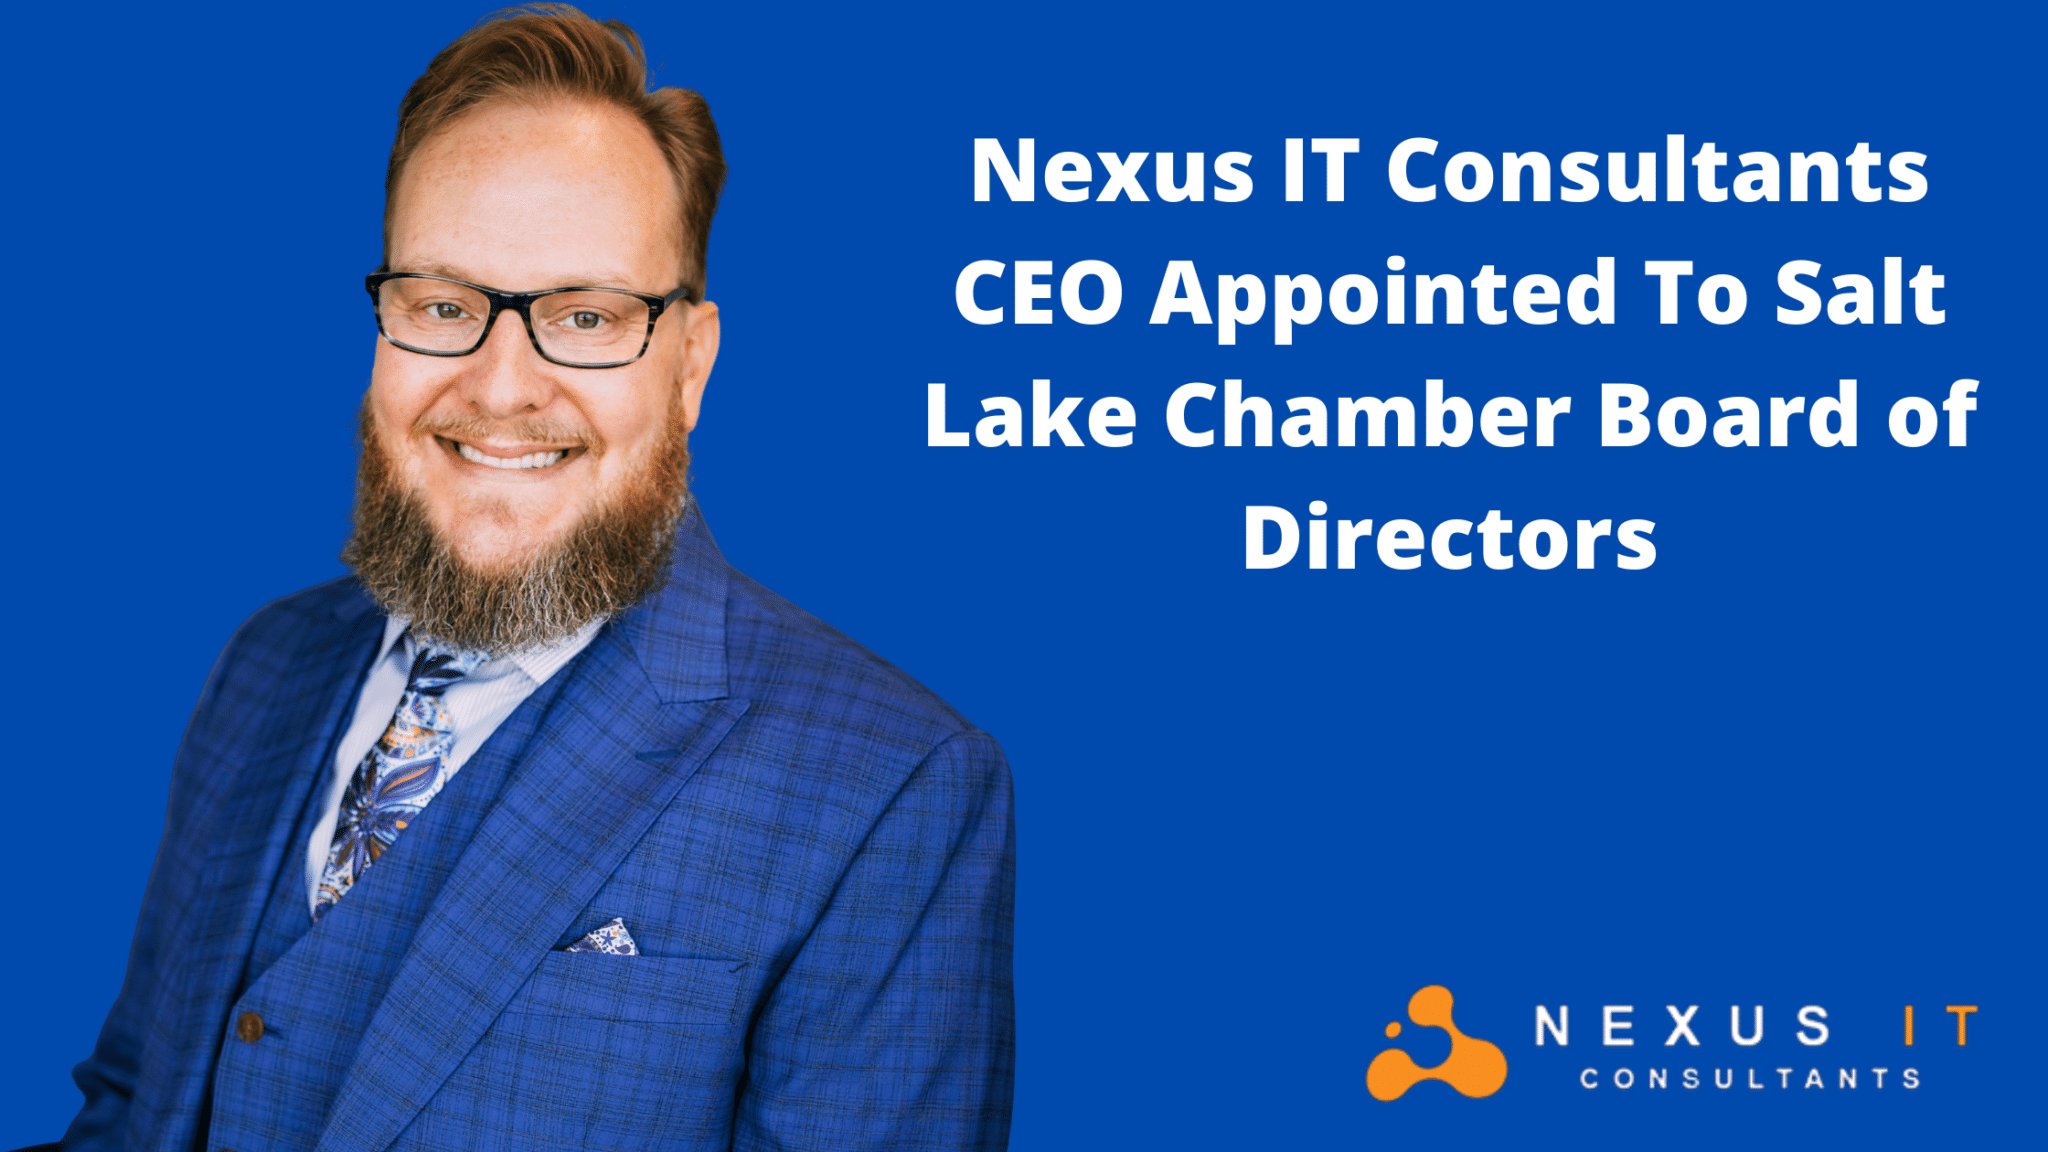 Nexus IT Consultants CEO Appointed To Salt Lake Chamber Board of Directors